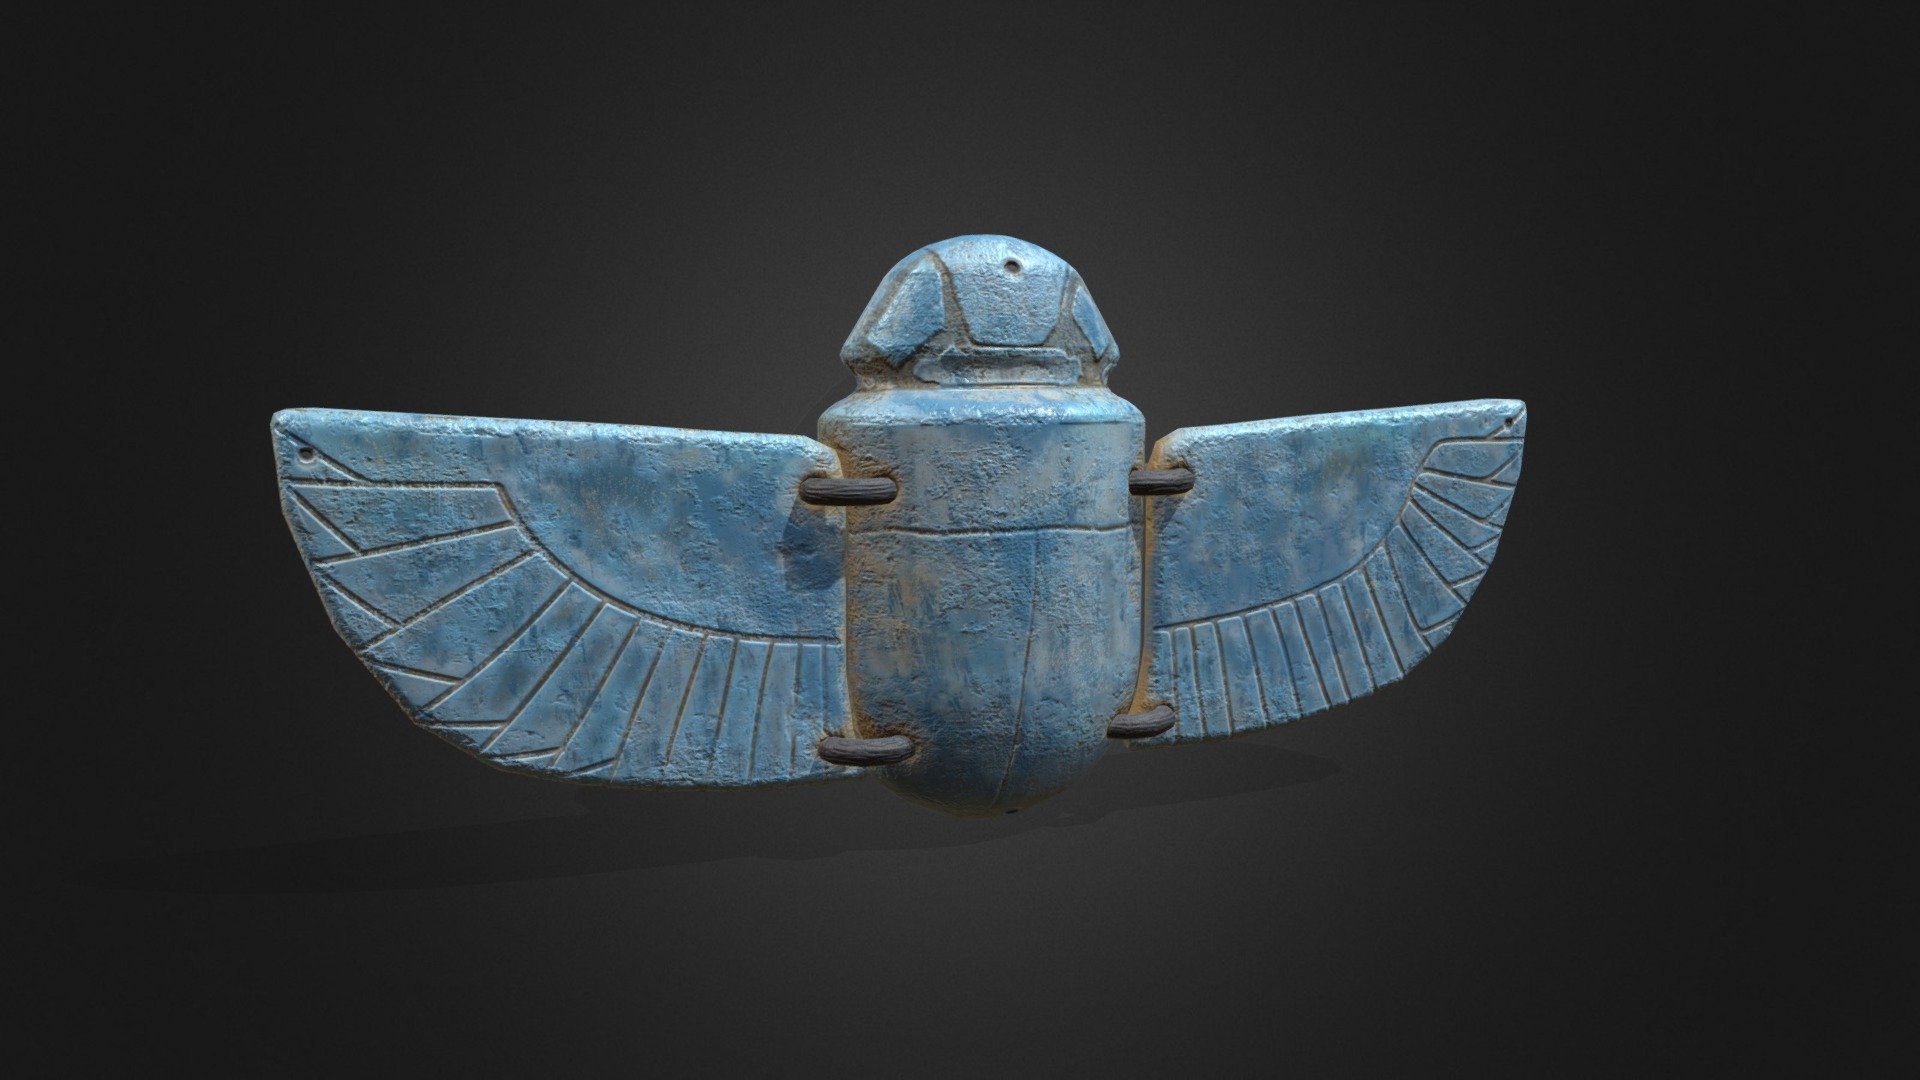 Winged Scarab Amulet 3d Model By Blkelly [56d9c65] Sketchfab